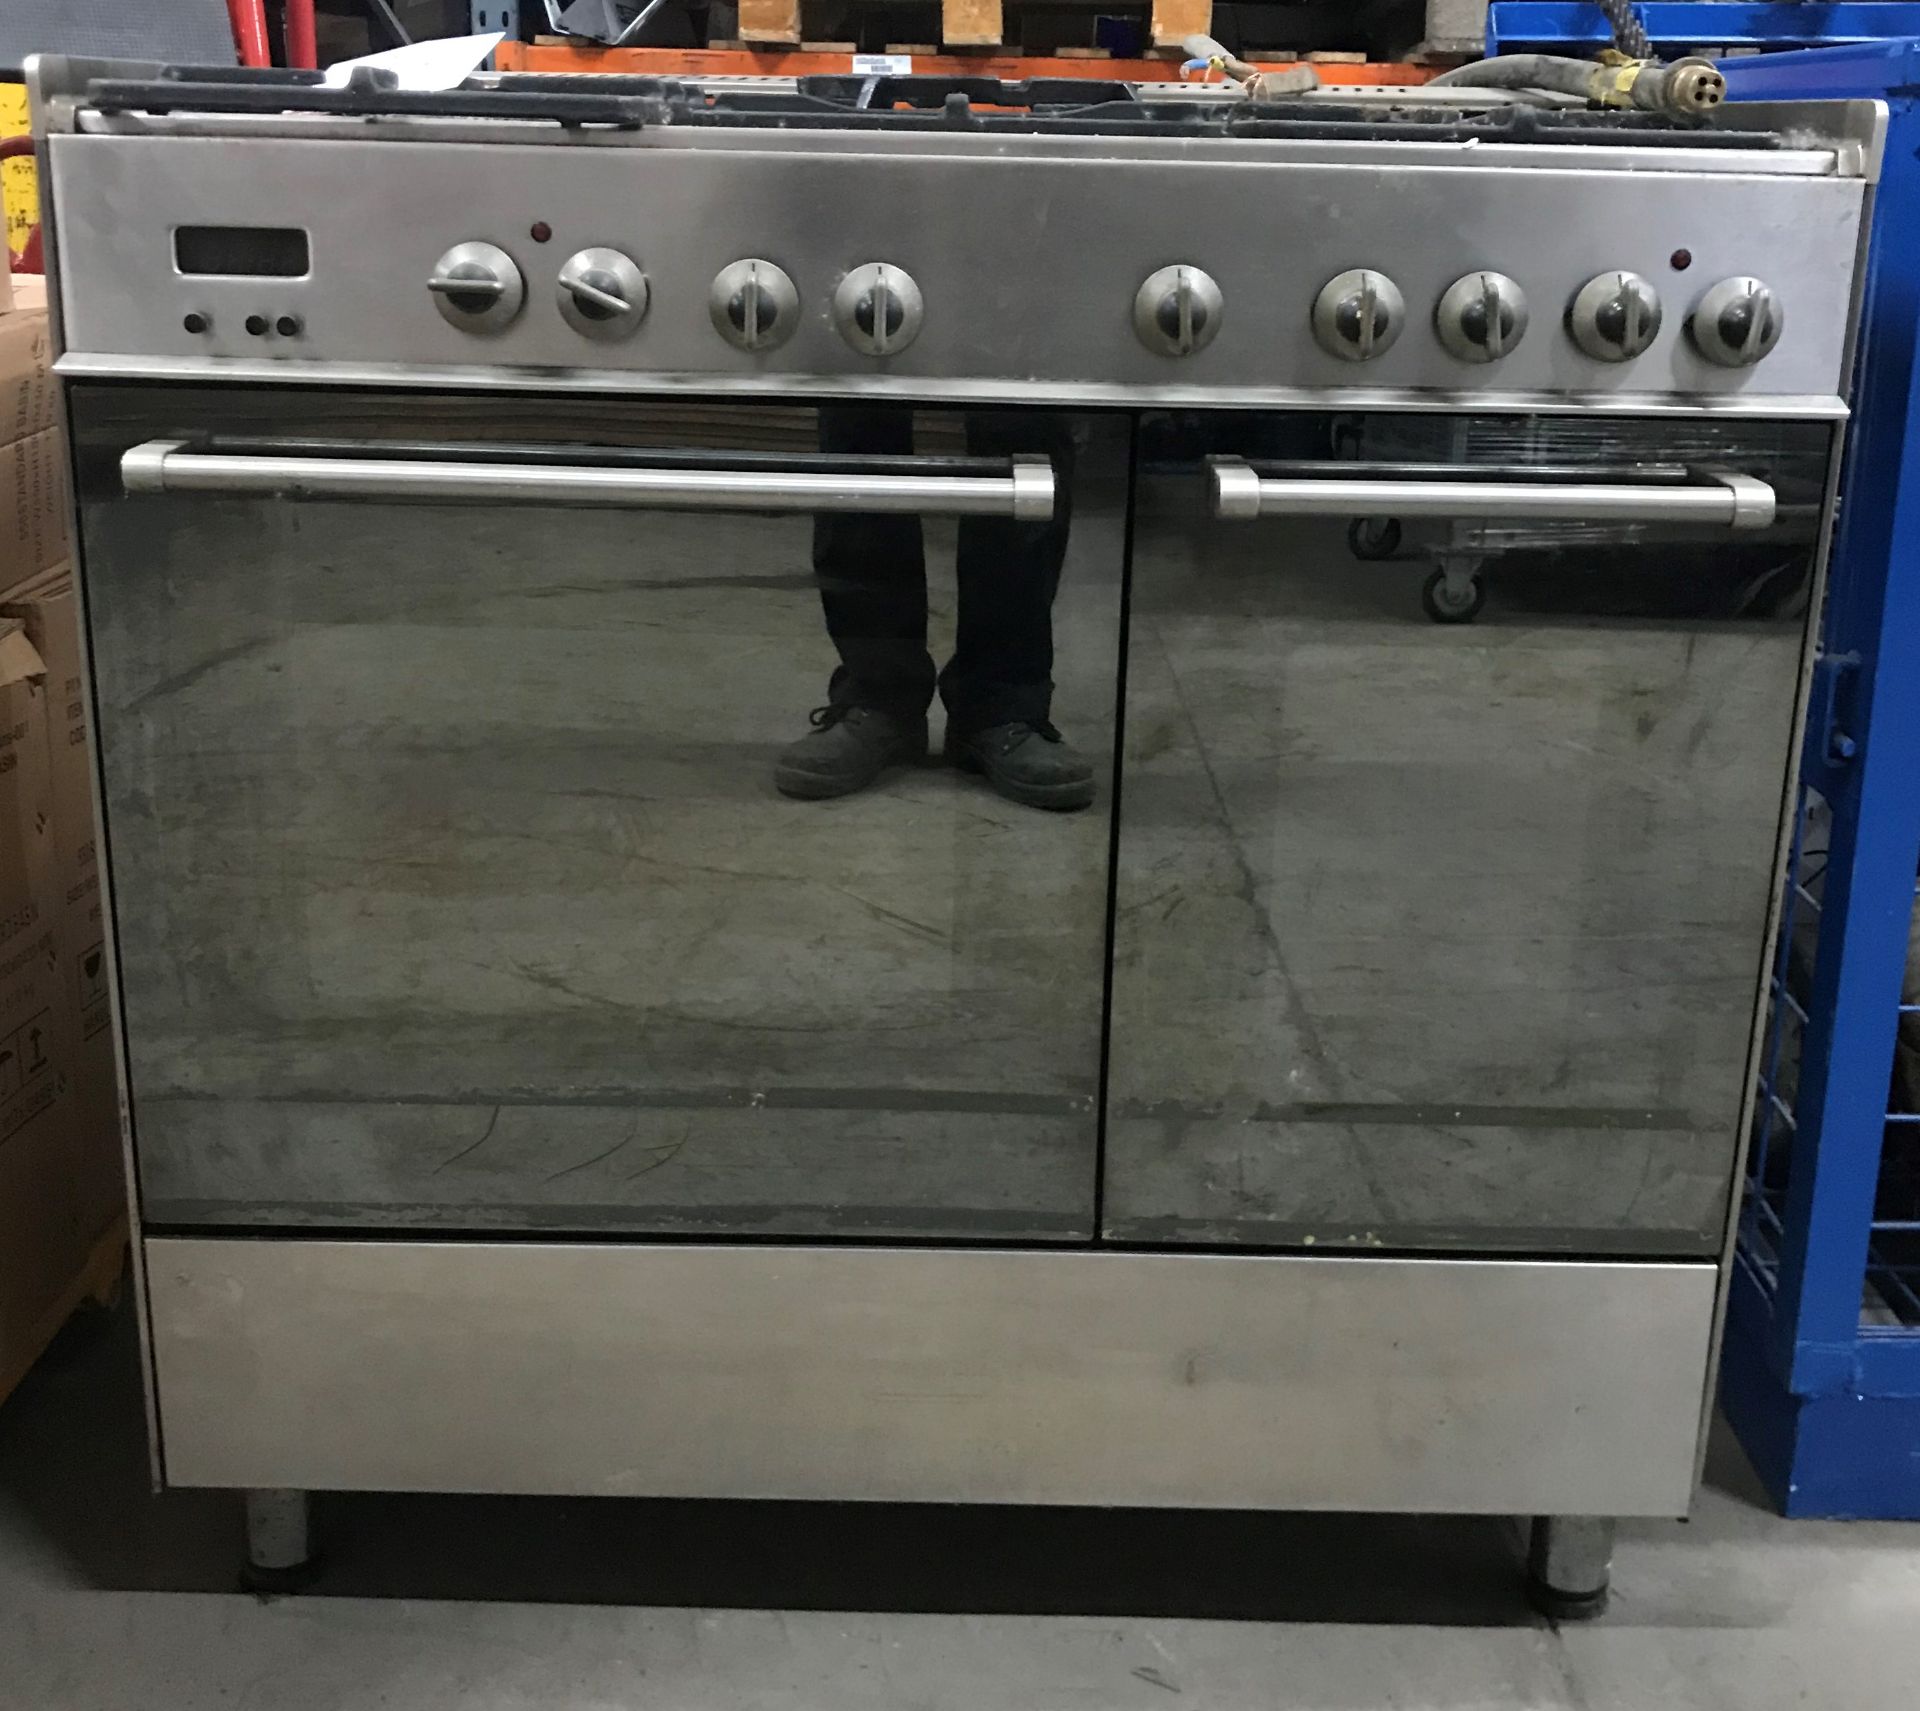 3 Hob Gas Cooker for Spares & Repairs